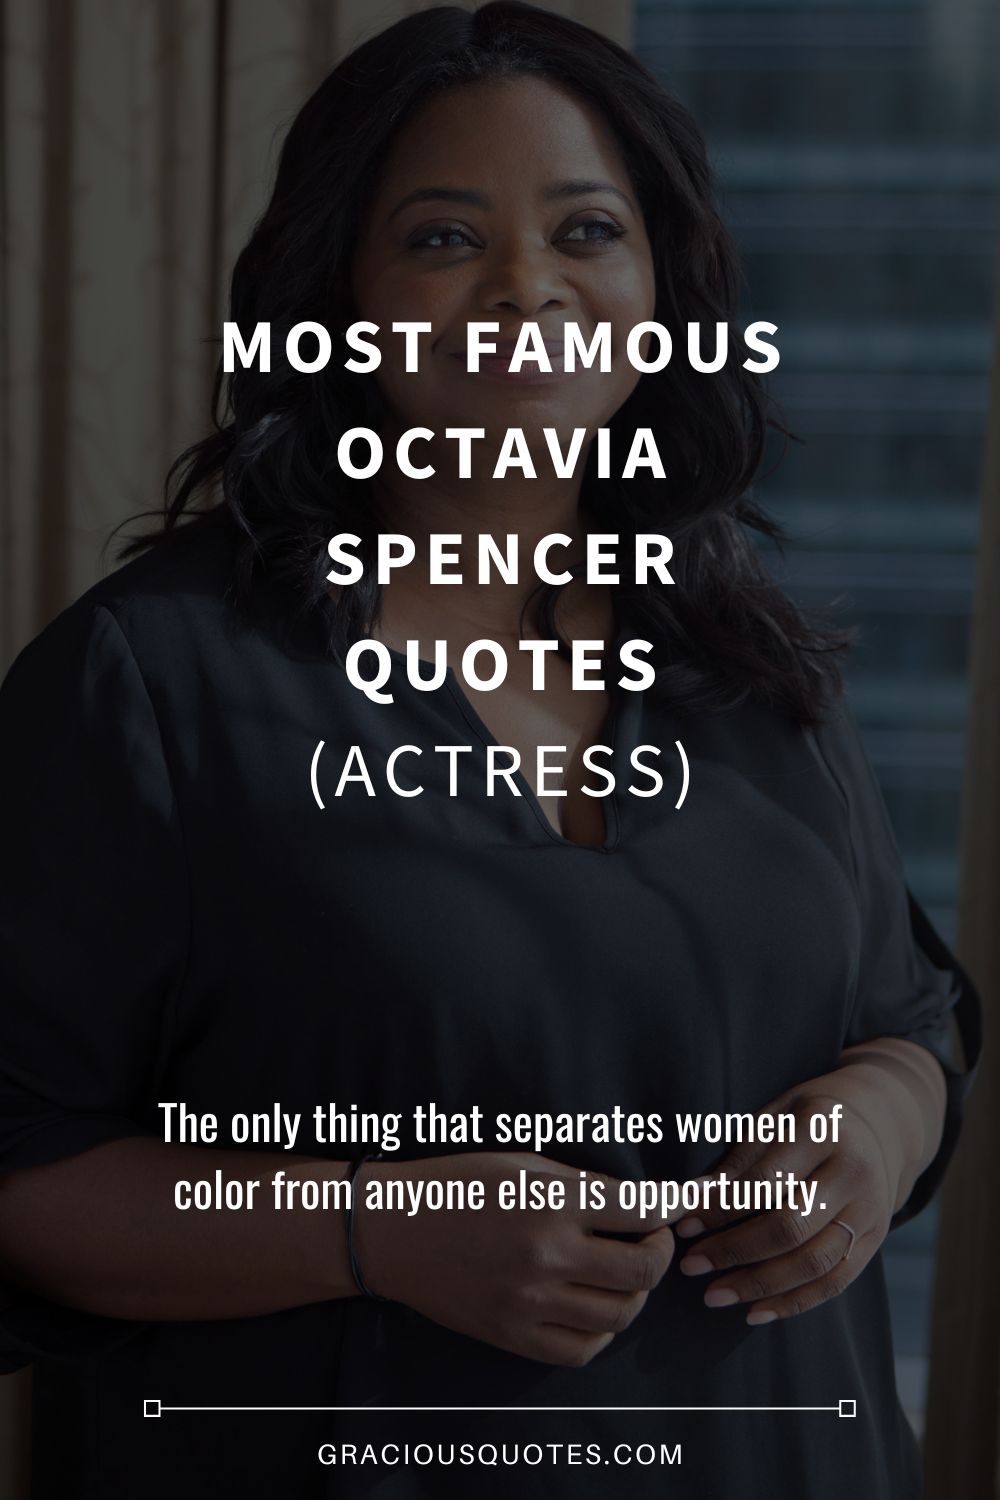 Most Famous Octavia Spencer Quotes (ACTRESS) - Gracious Quotes